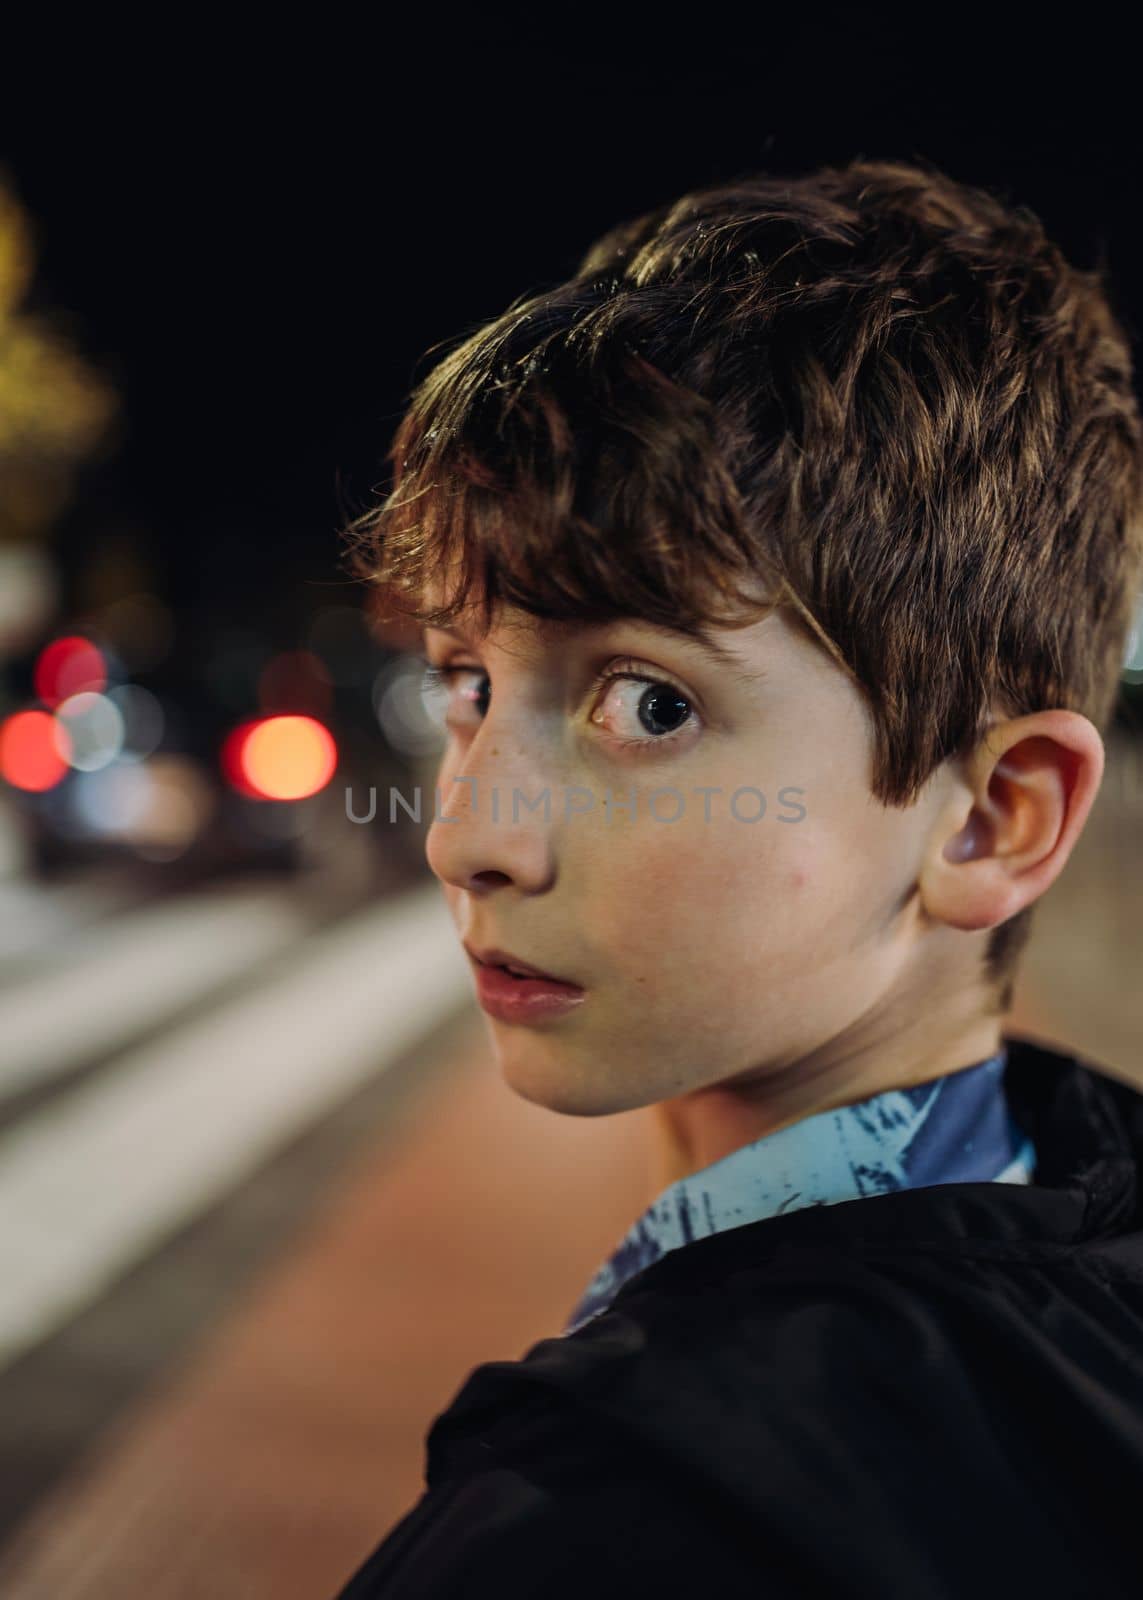 headshot portrait of a young boy lost at night looking back scared.